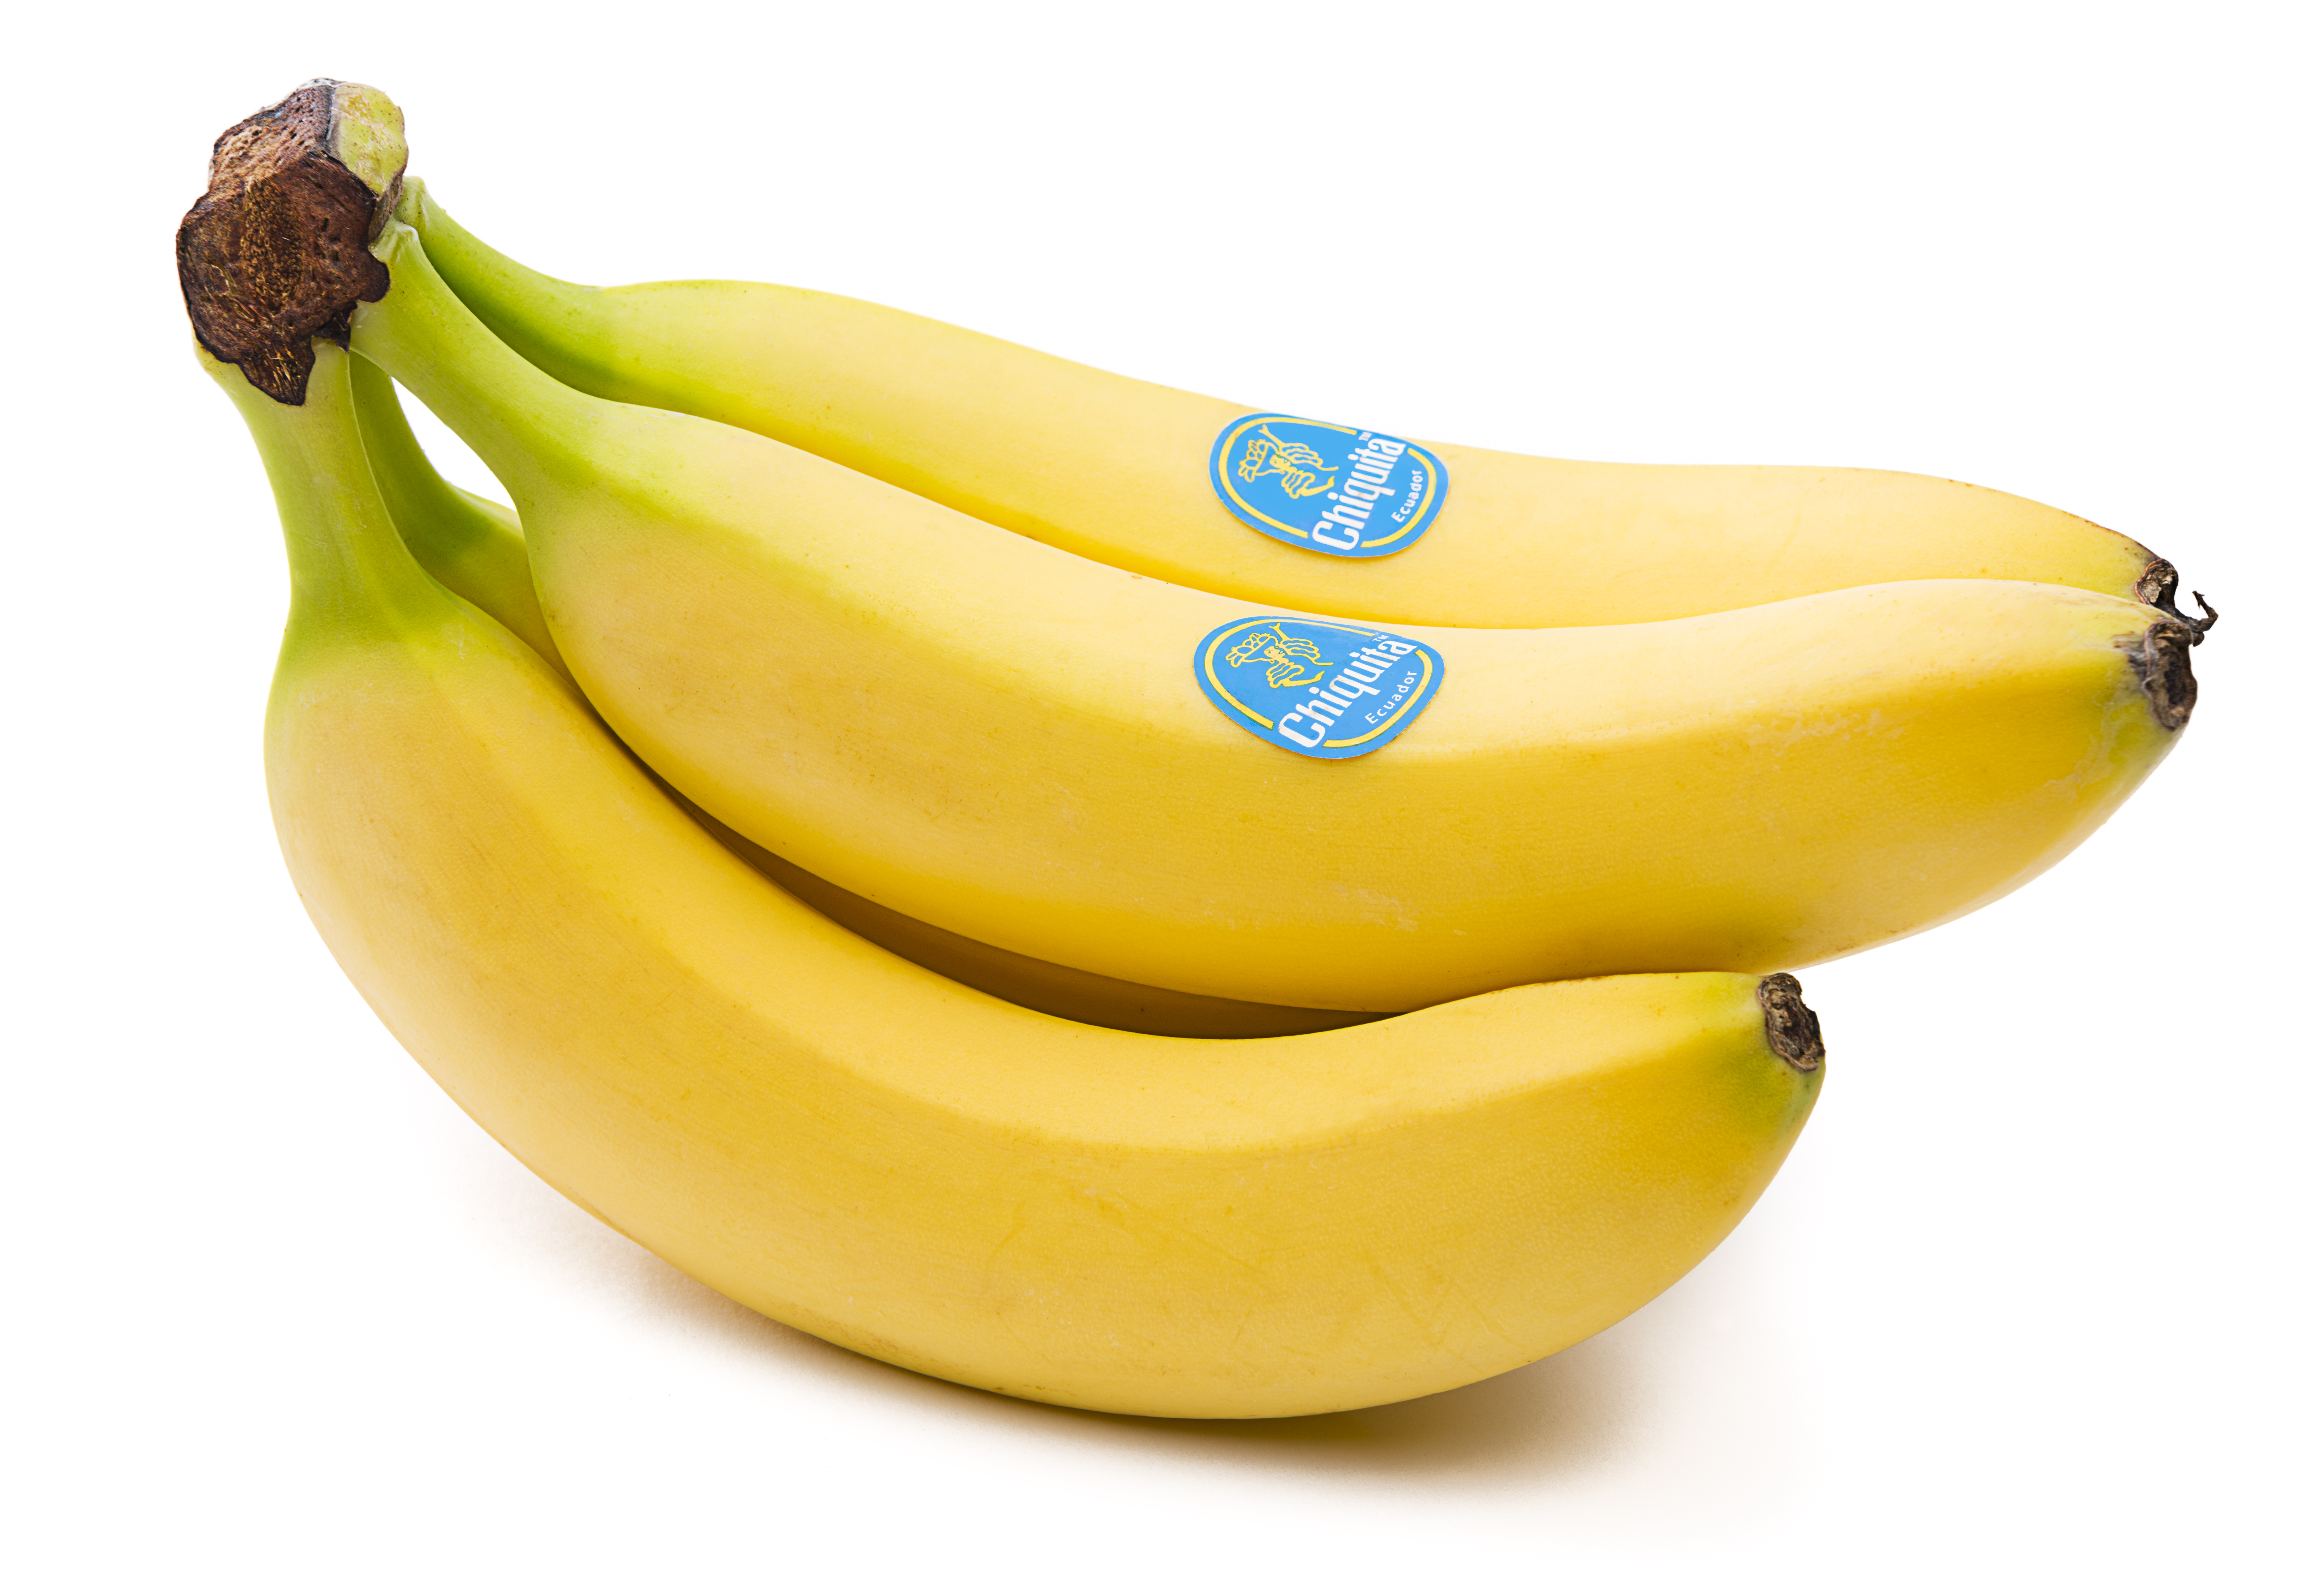 a bunch of bananas with a Chiquita sticker